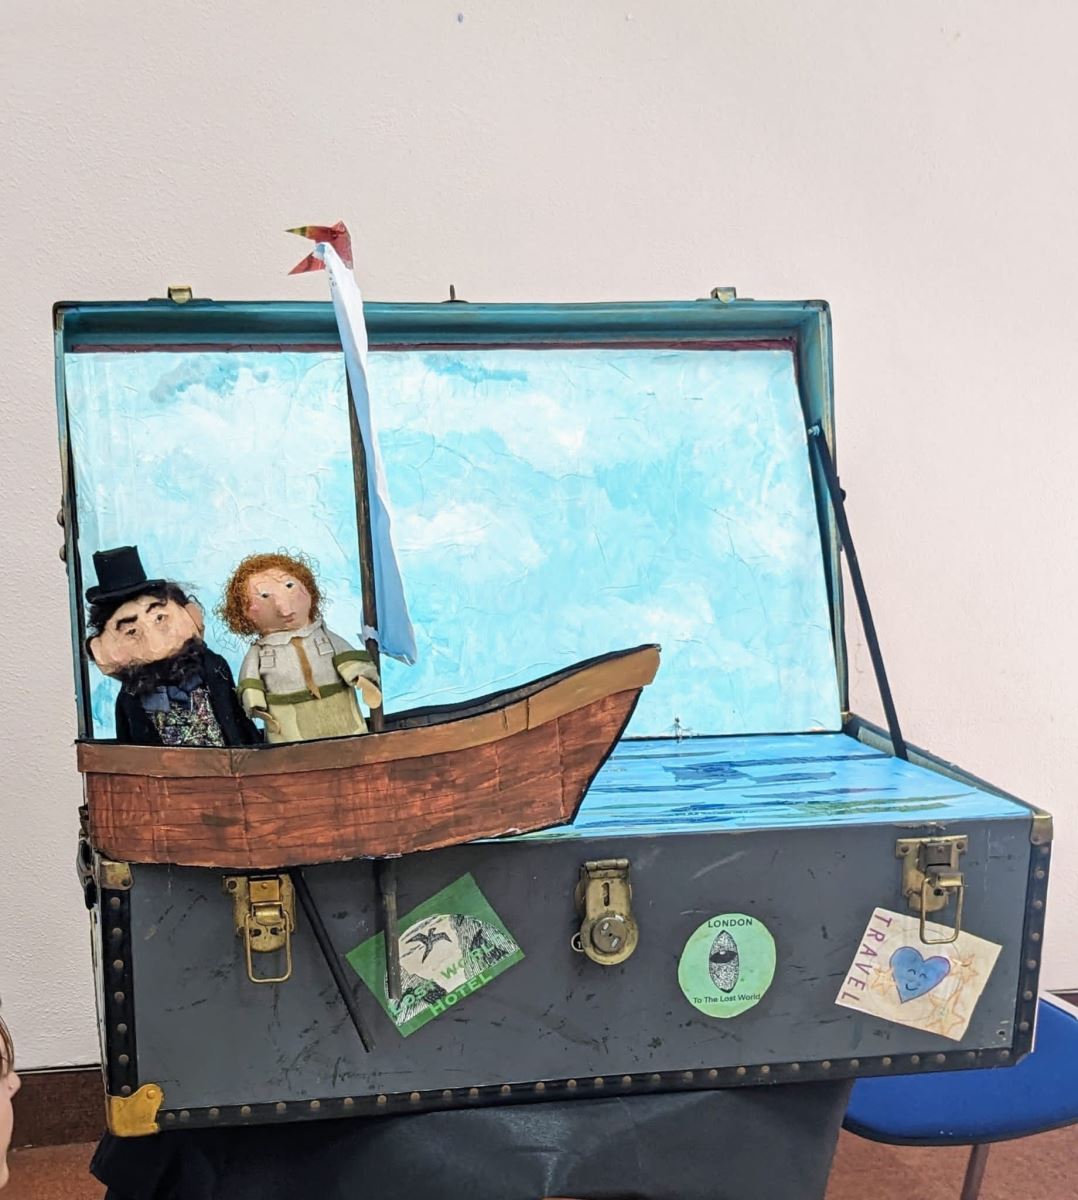 the puppets of the boat and the person from before with the person in the boat with another person in a top hat and a beard in a luggage container decorated to look like the sea